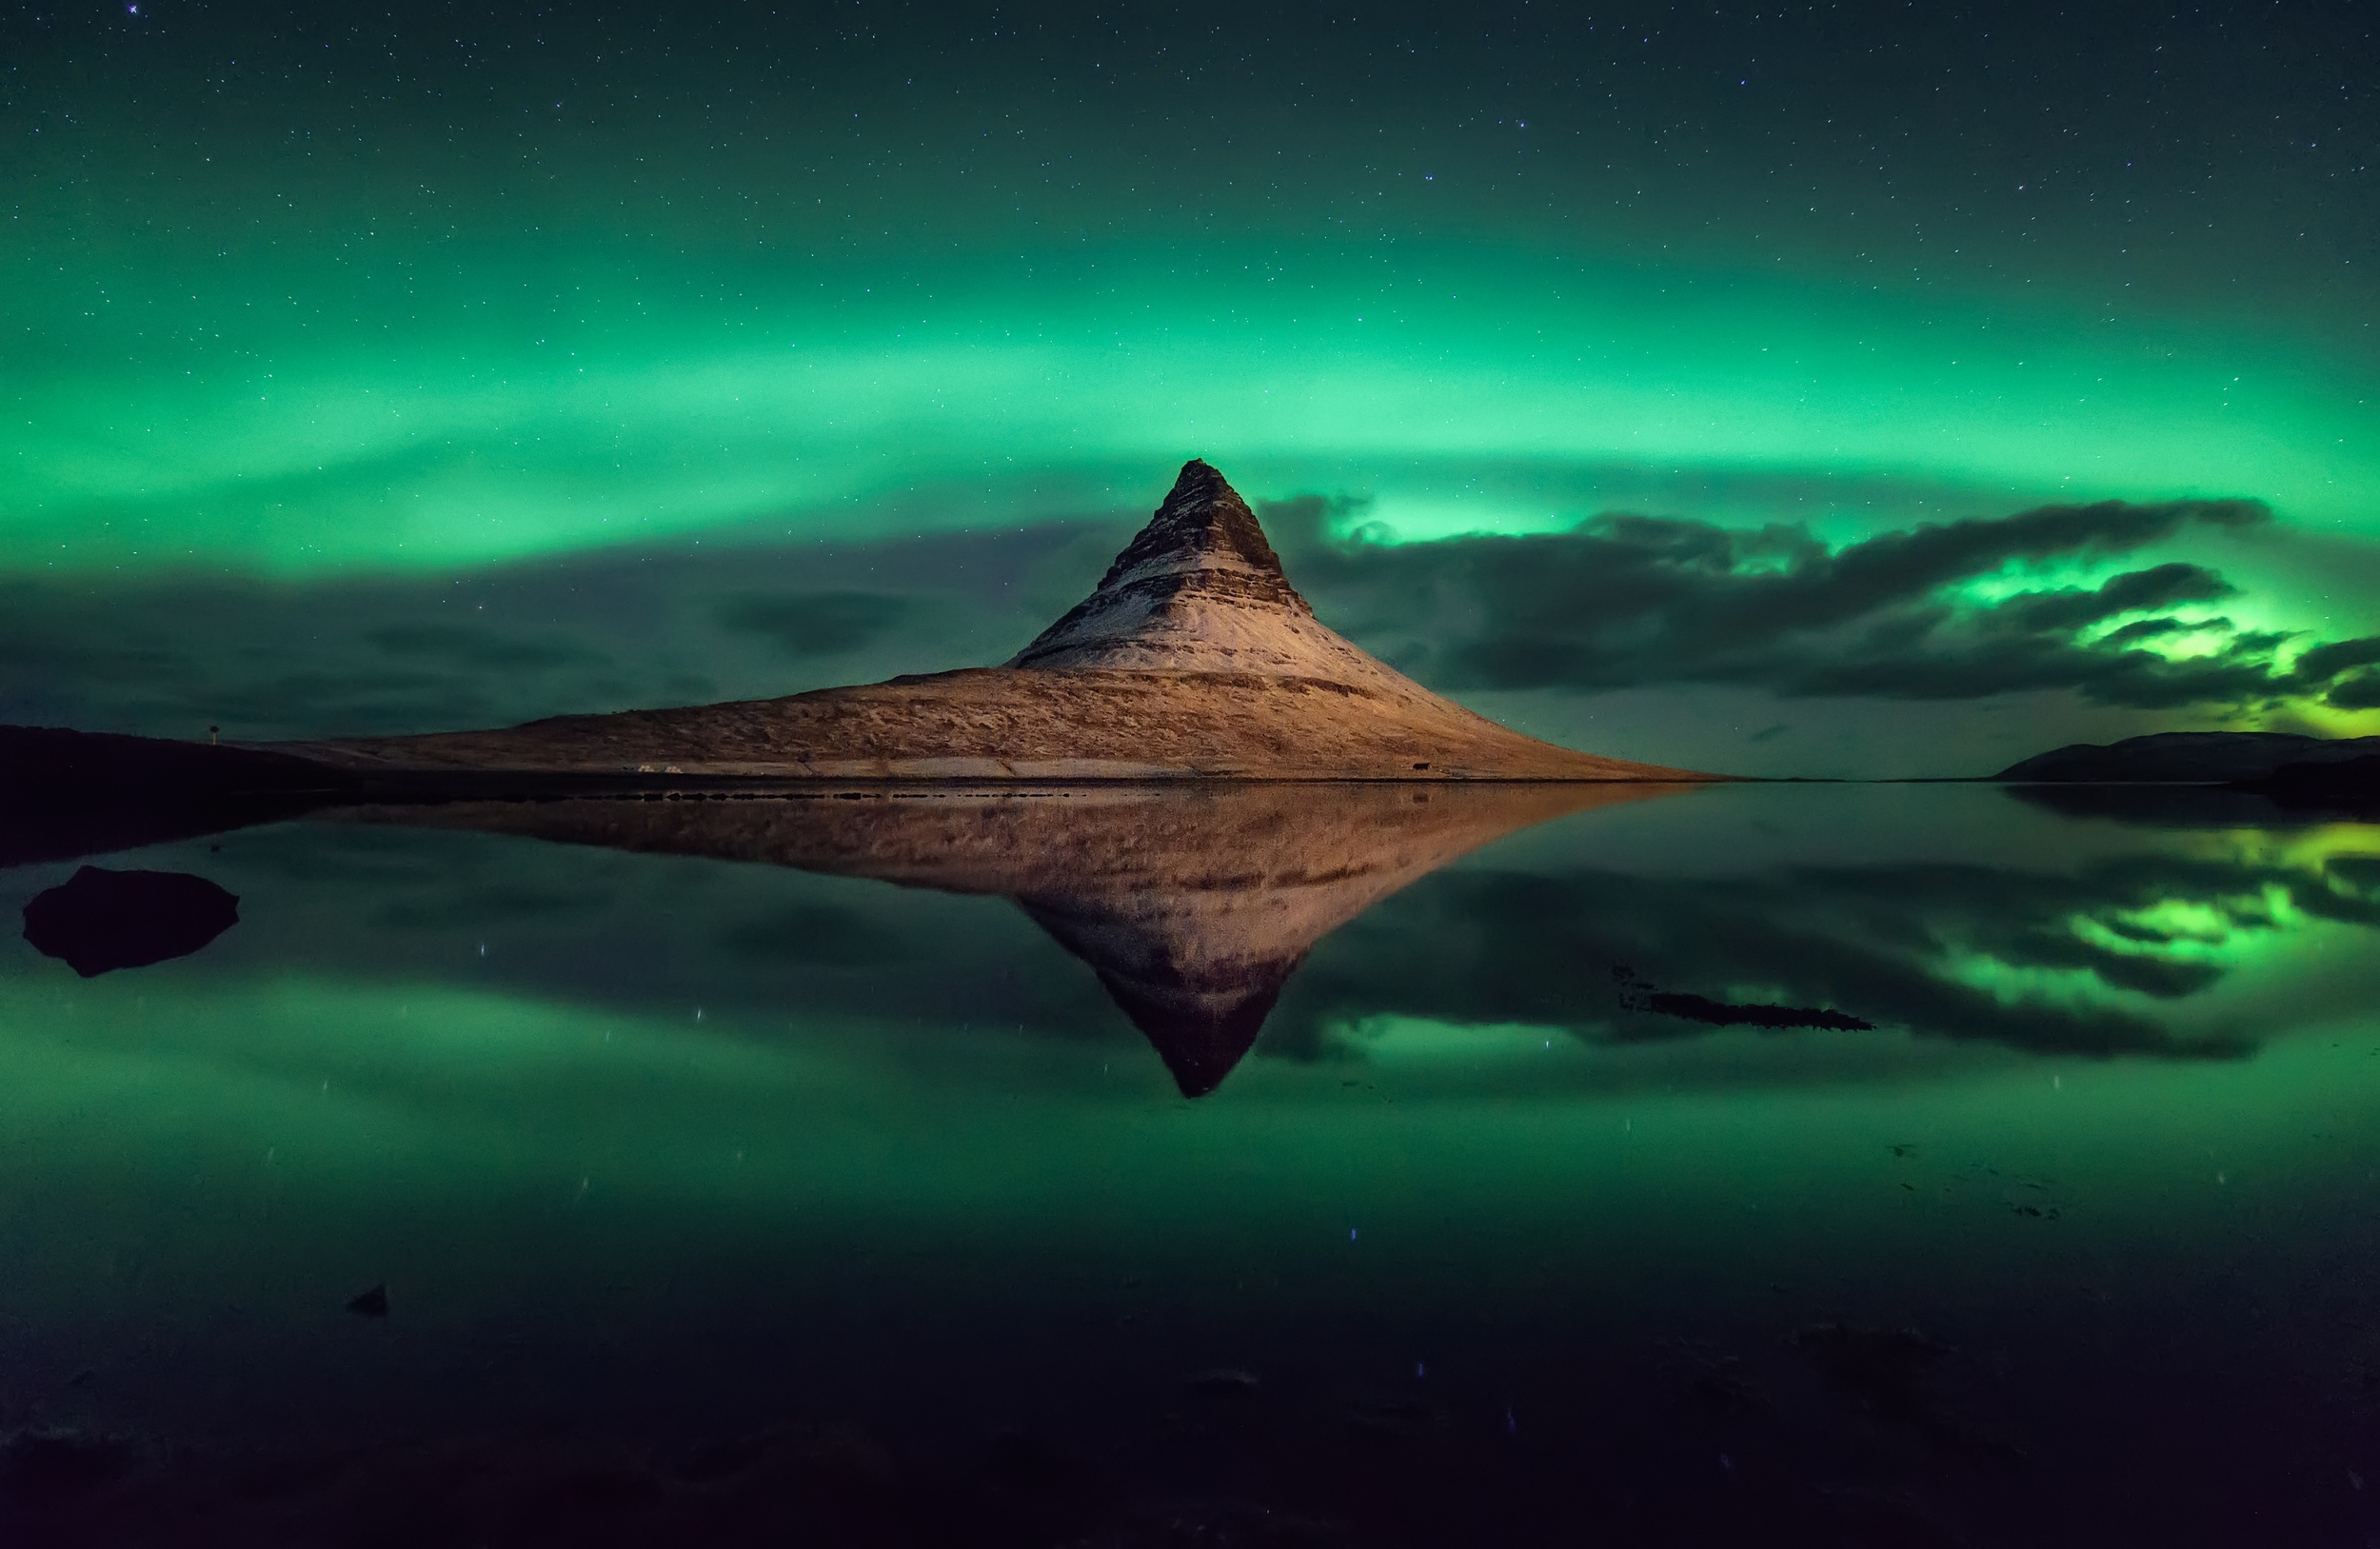 2560x1600 Aurora Borealis Kirkjufell Iceland 2560x1600 Resolution Wallpaper Hd Nature 4k Wallpapers Images Photos And Background Wallpapers Den